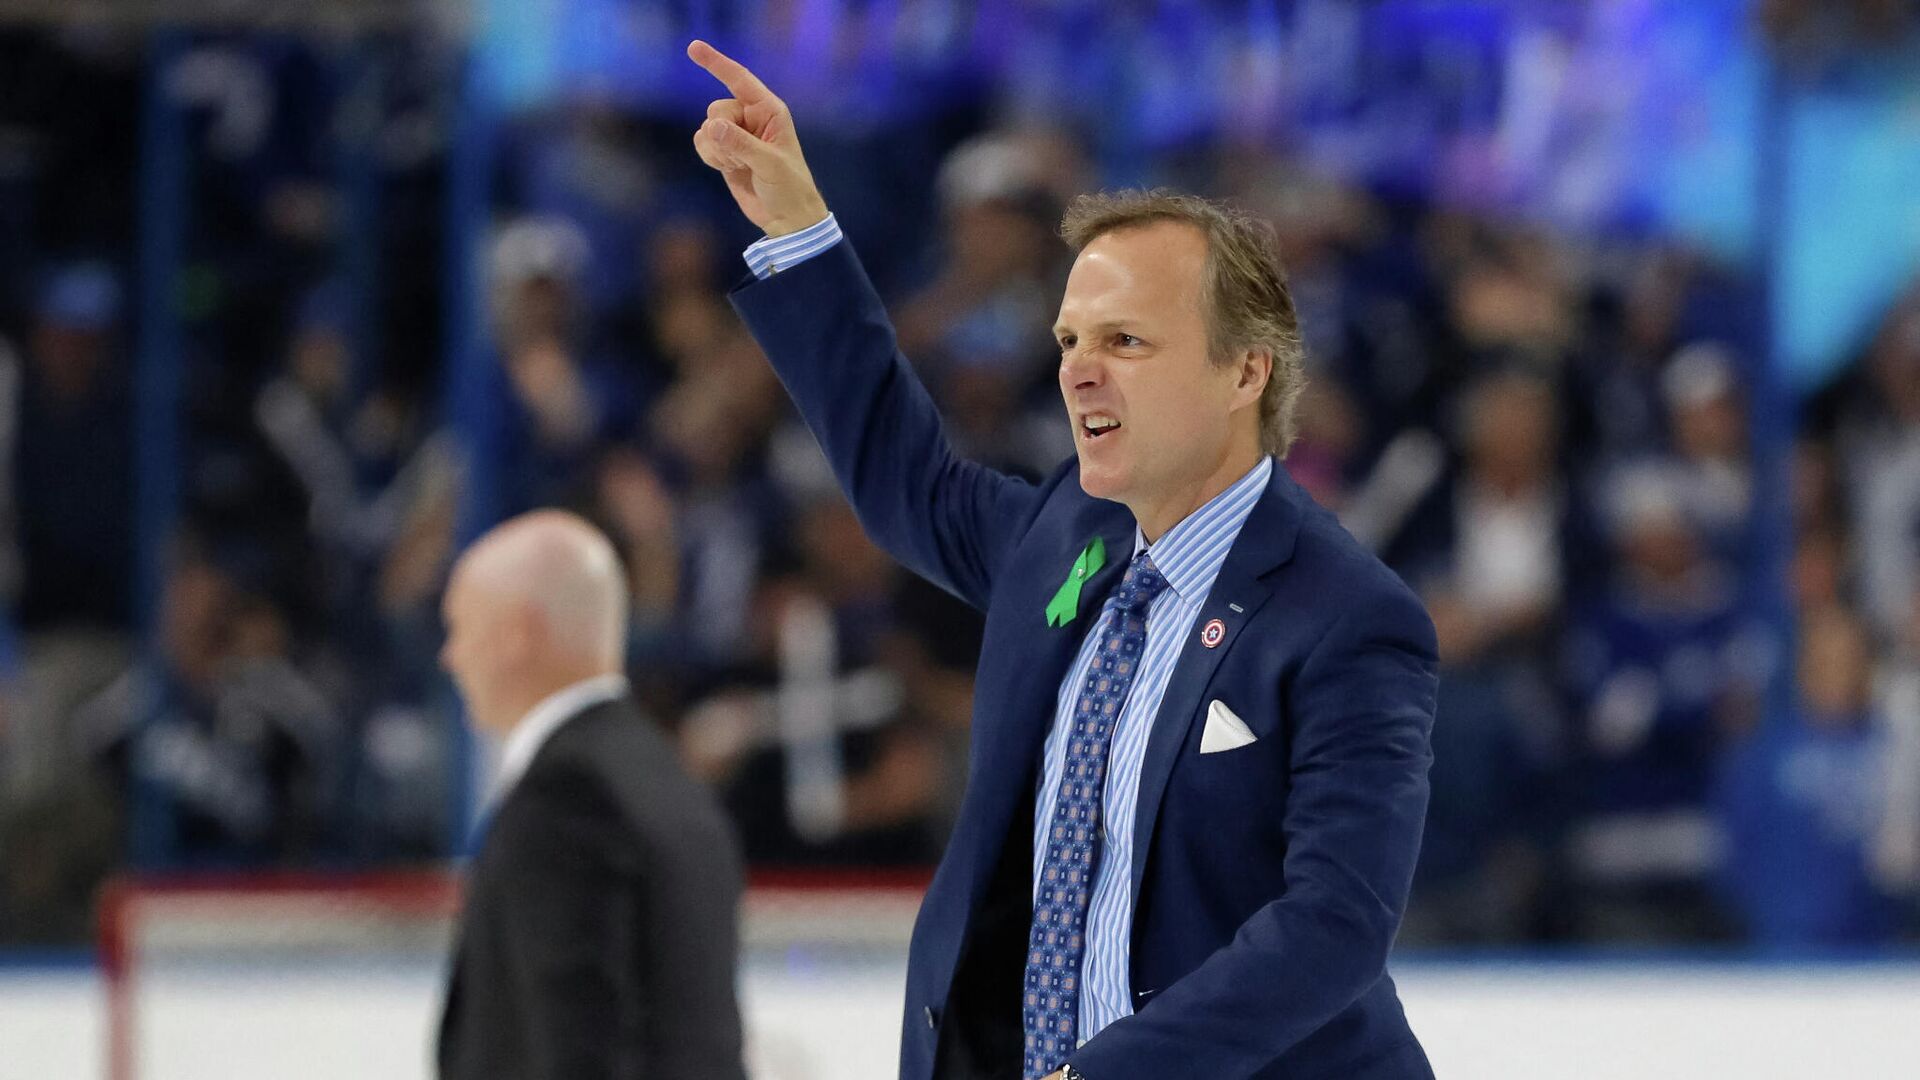 TAMPA, FL - APRIL 21: Head coach Jon Cooper of the Tampa Bay Lightning celebrates a series win as head coach John Hynes of the New Jersey Devils walks off after Game Five of the Eastern Conference First Round during the 2018 NHL Stanley Cup Playoffs at Amalie Arena on April 21, 2018 in Tampa, Florida.   Mike Carlson/Getty Images/AFP (Photo by Mike Carlson / GETTY IMAGES NORTH AMERICA / Getty Images via AFP) - РИА Новости, 1920, 09.08.2021